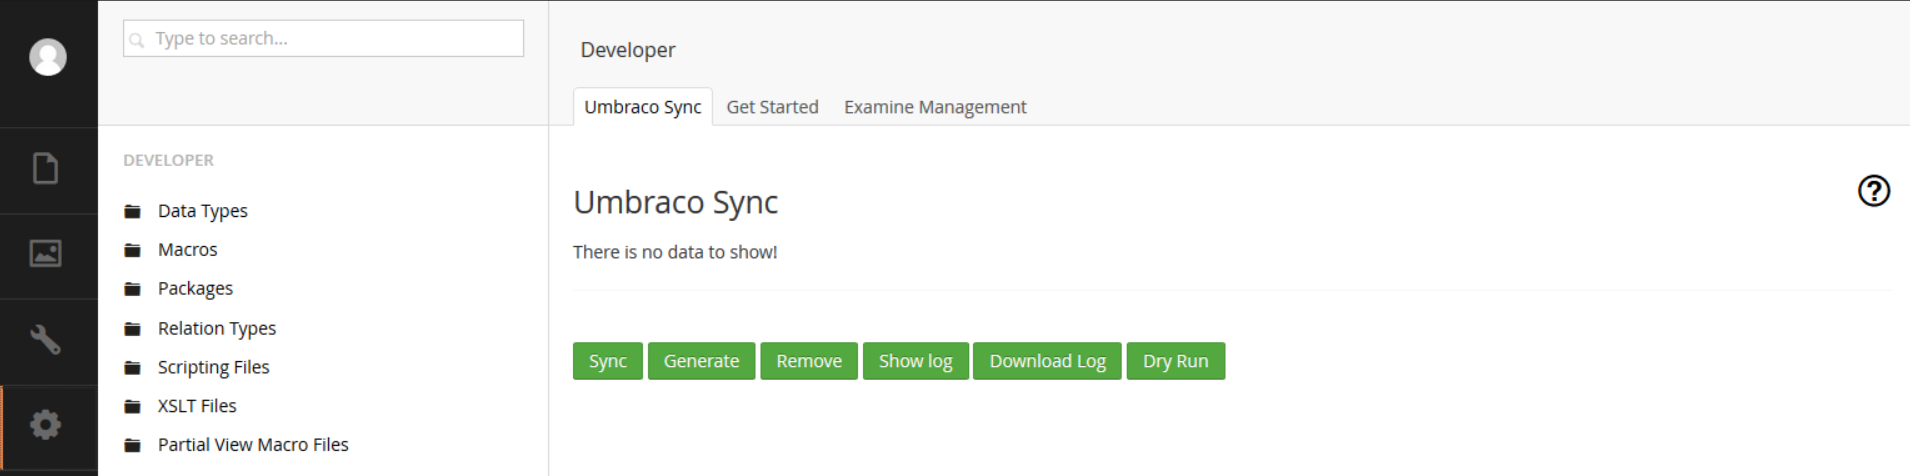 Continuous-deployment-met-Umbraco-Sync-Backend-plugin-screenshot